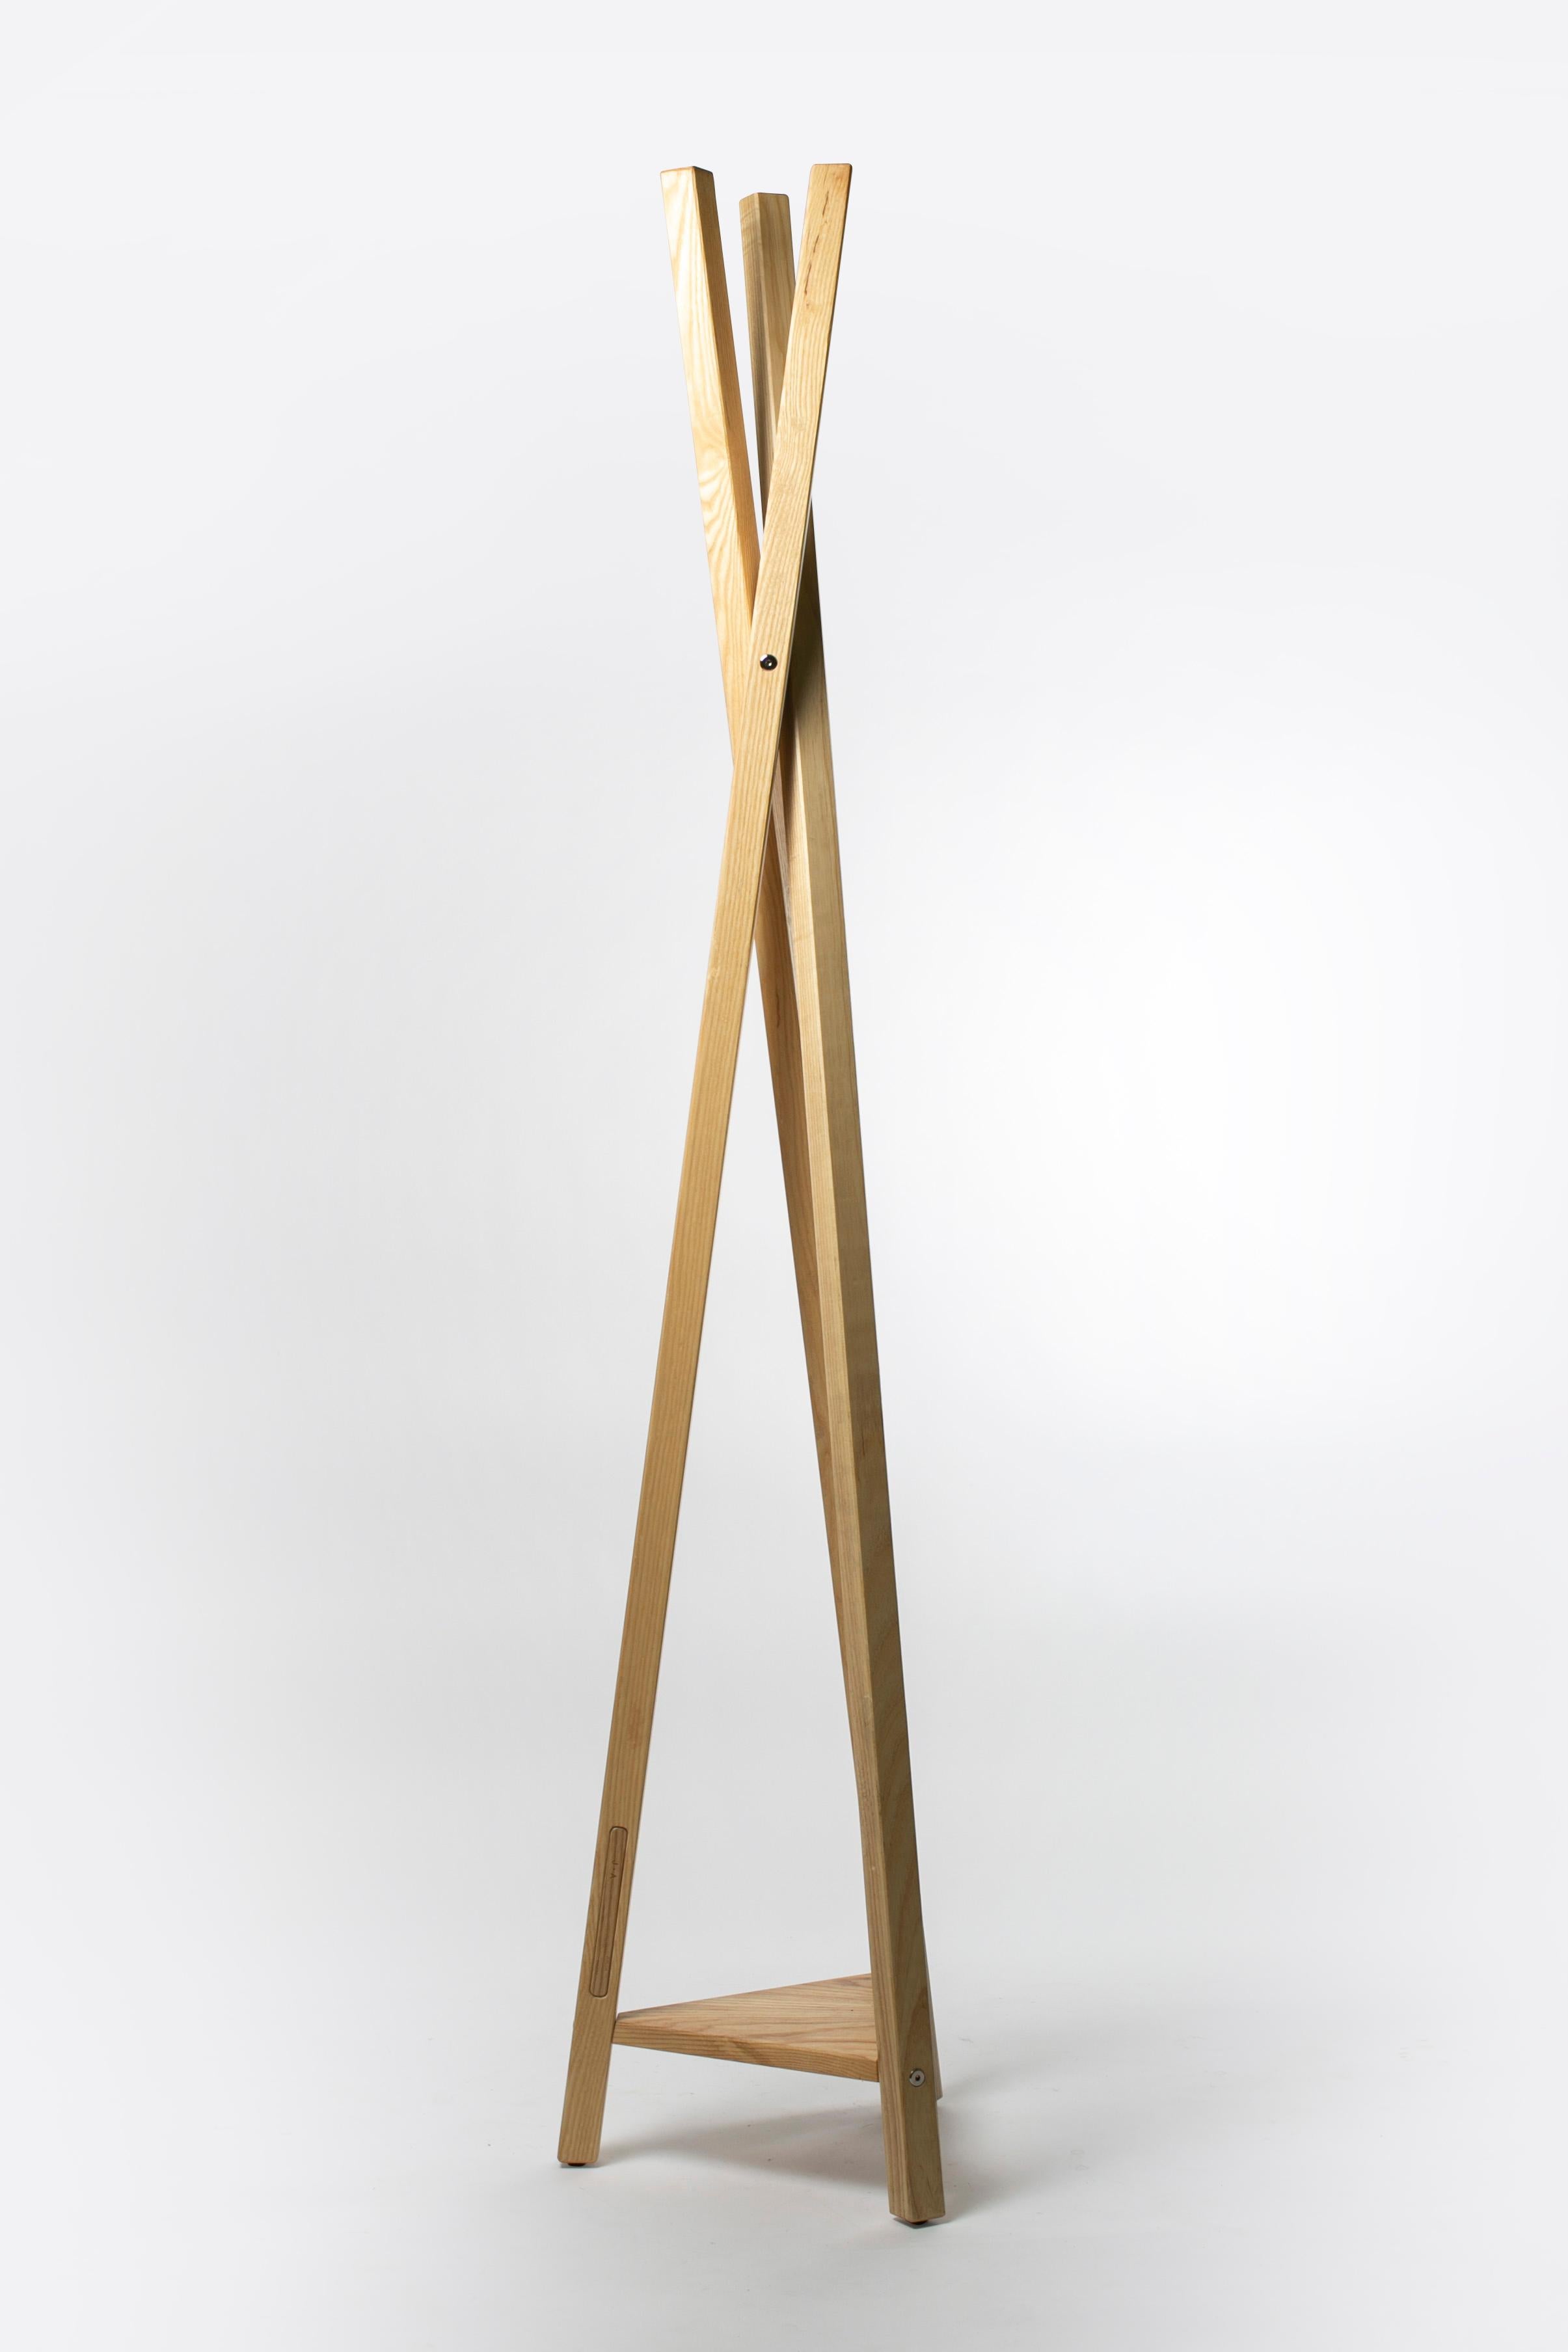 Mesones 170, Ash Coat Stand, Contemporary Mexican Design by Juskani Alonso In New Condition For Sale In Mexico City, MX